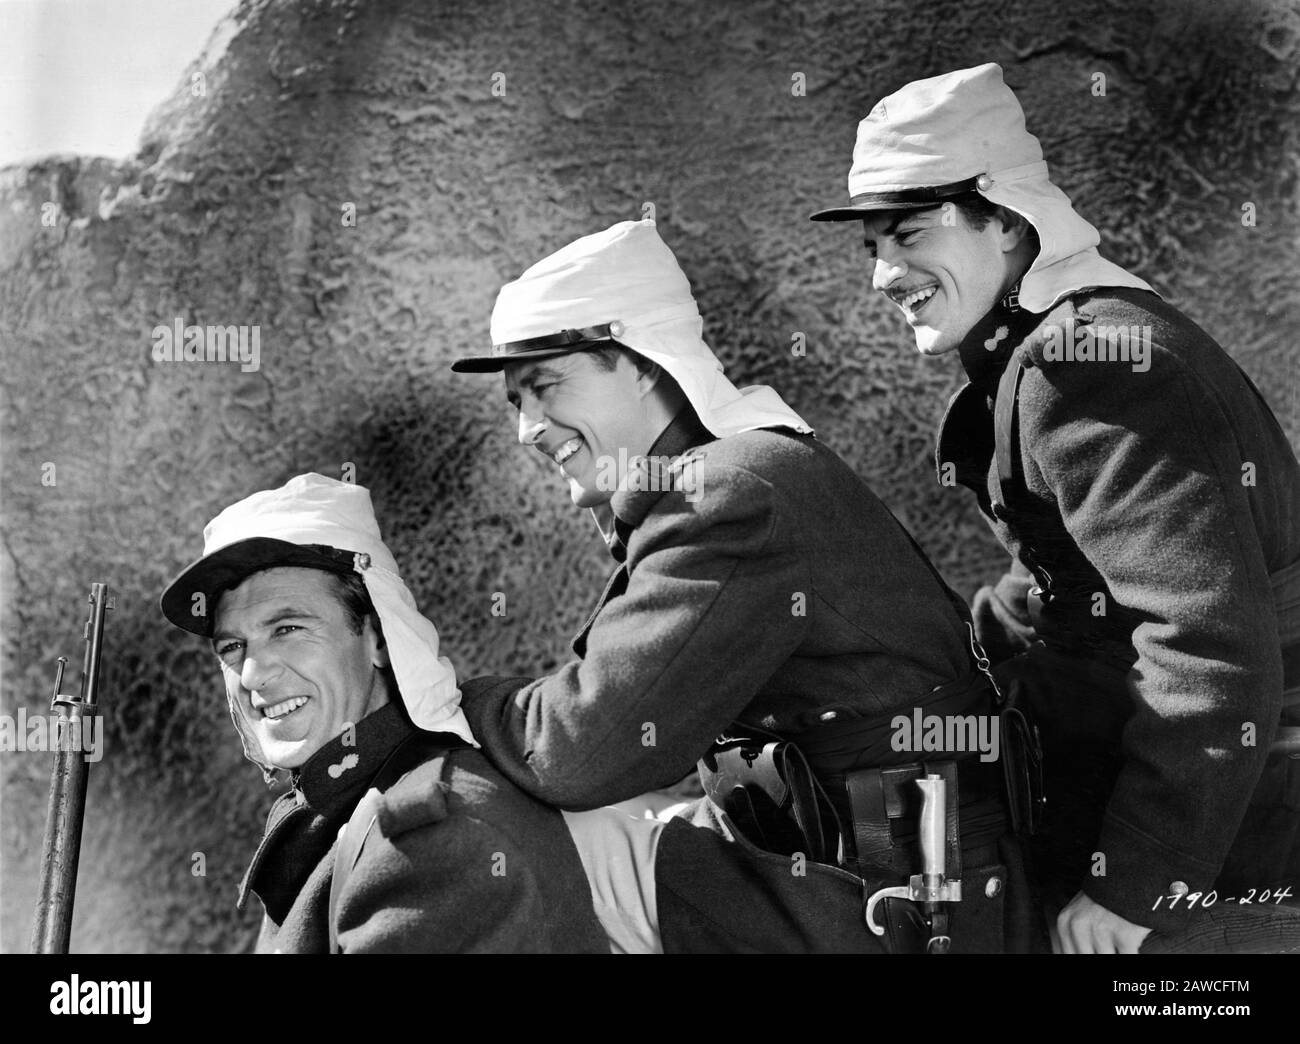 GARY COOPER as Beau Geste RAY MILLAND as John Geste and ROBERT PRESTON as Digby Geste in BEAU GESTE 1939 director WILLIAM A. WELLMAN novel P.C. WREN Paramount Pictures Corporation Stock Photo